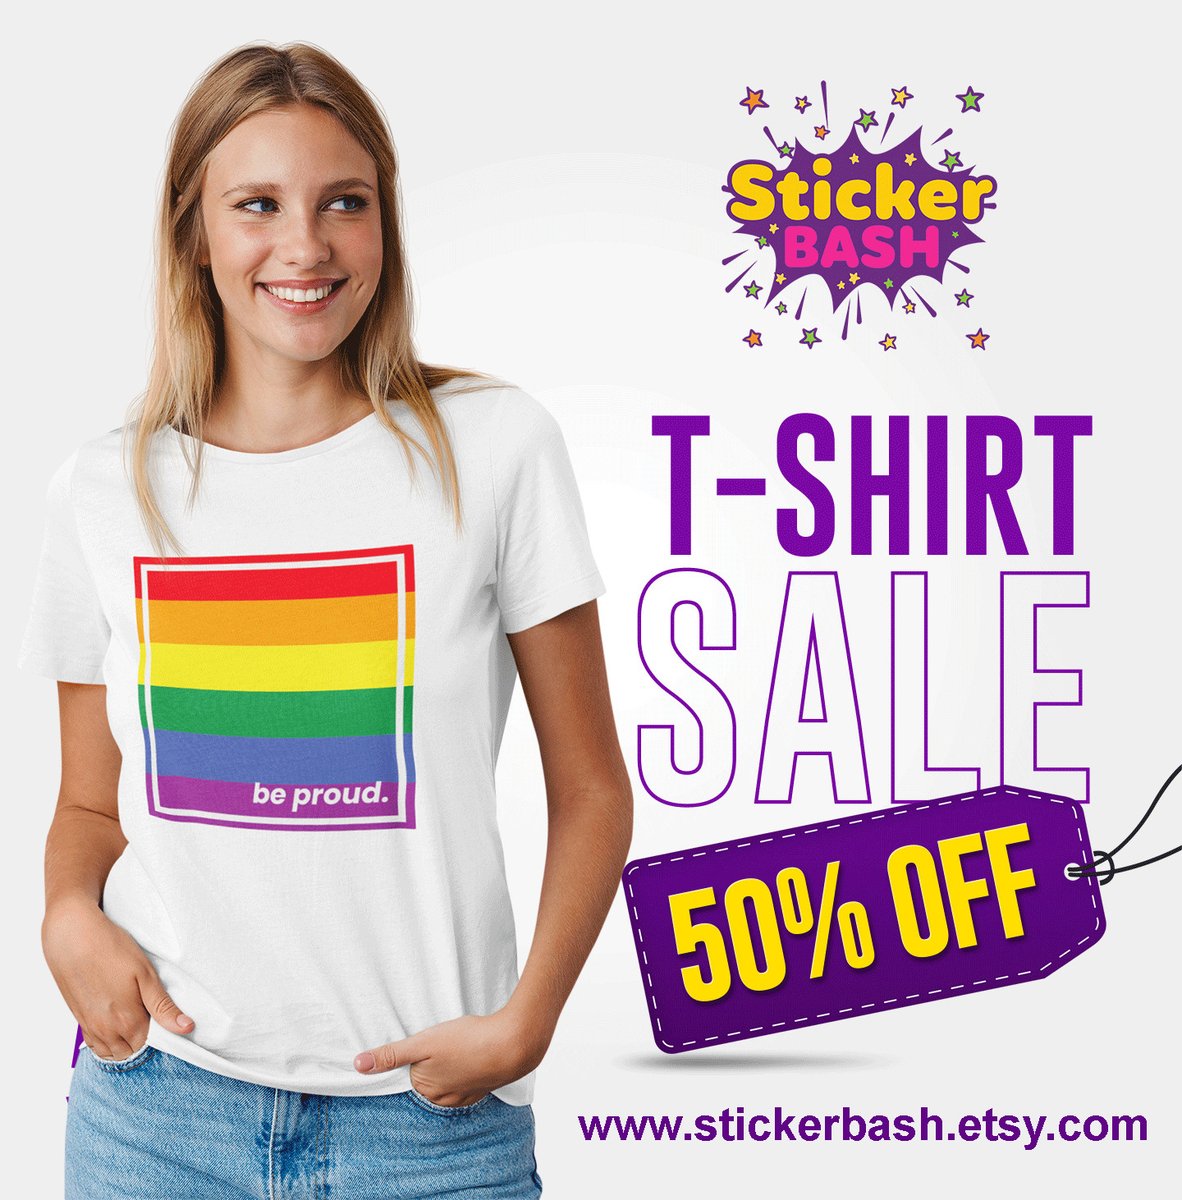 Grab it while it's hot 🔥 Our t-shirt sale is extended for another week❗️ Get yours now at stickerbash.etsy.com 👈👈
.
.
.
#tshirtsonsale #personalizedtshirts #logoshirts #companyshirt #graphictshirt #cheapgraphicteesmens #cheapgraphicteeswomens #etsytshirtshop #printedtees